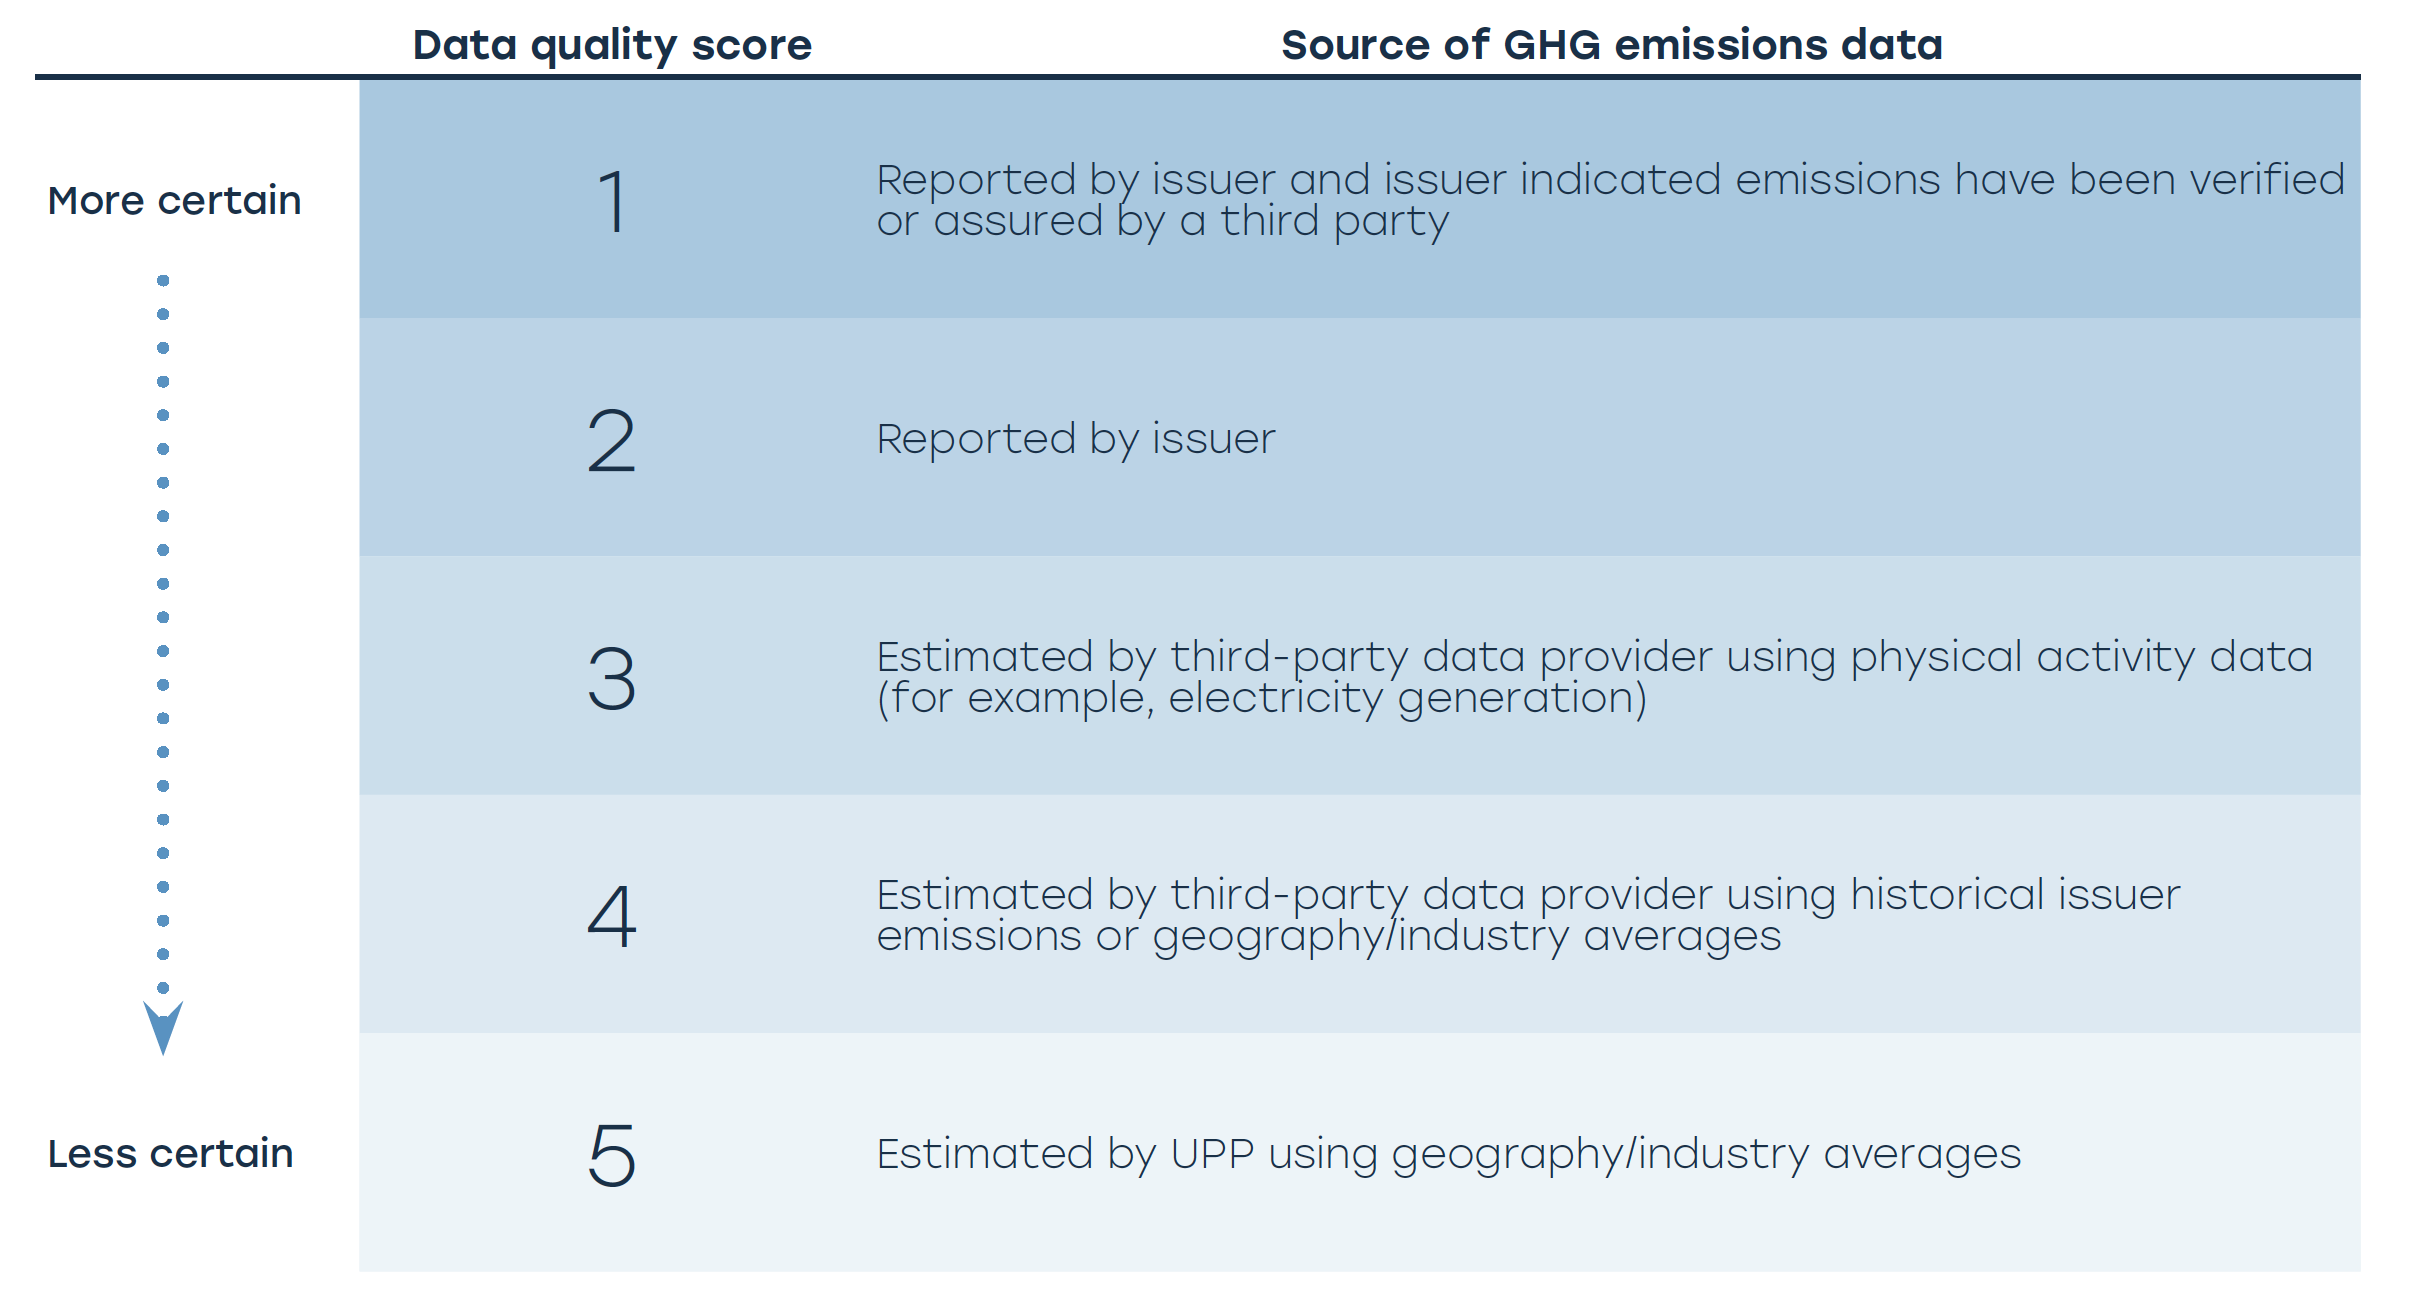 1 Reported by issuer and issuer indicated emissions have been verified or assured by a third party, 2 Reported by issuer, 3 Estimated by third-party data provider using physical activity data (for example, electricity generation), 4 Estimated by third-party data provider using historical issuer emissions or geography/industry averages, 5 Estimated by UPP using geography/industry averages